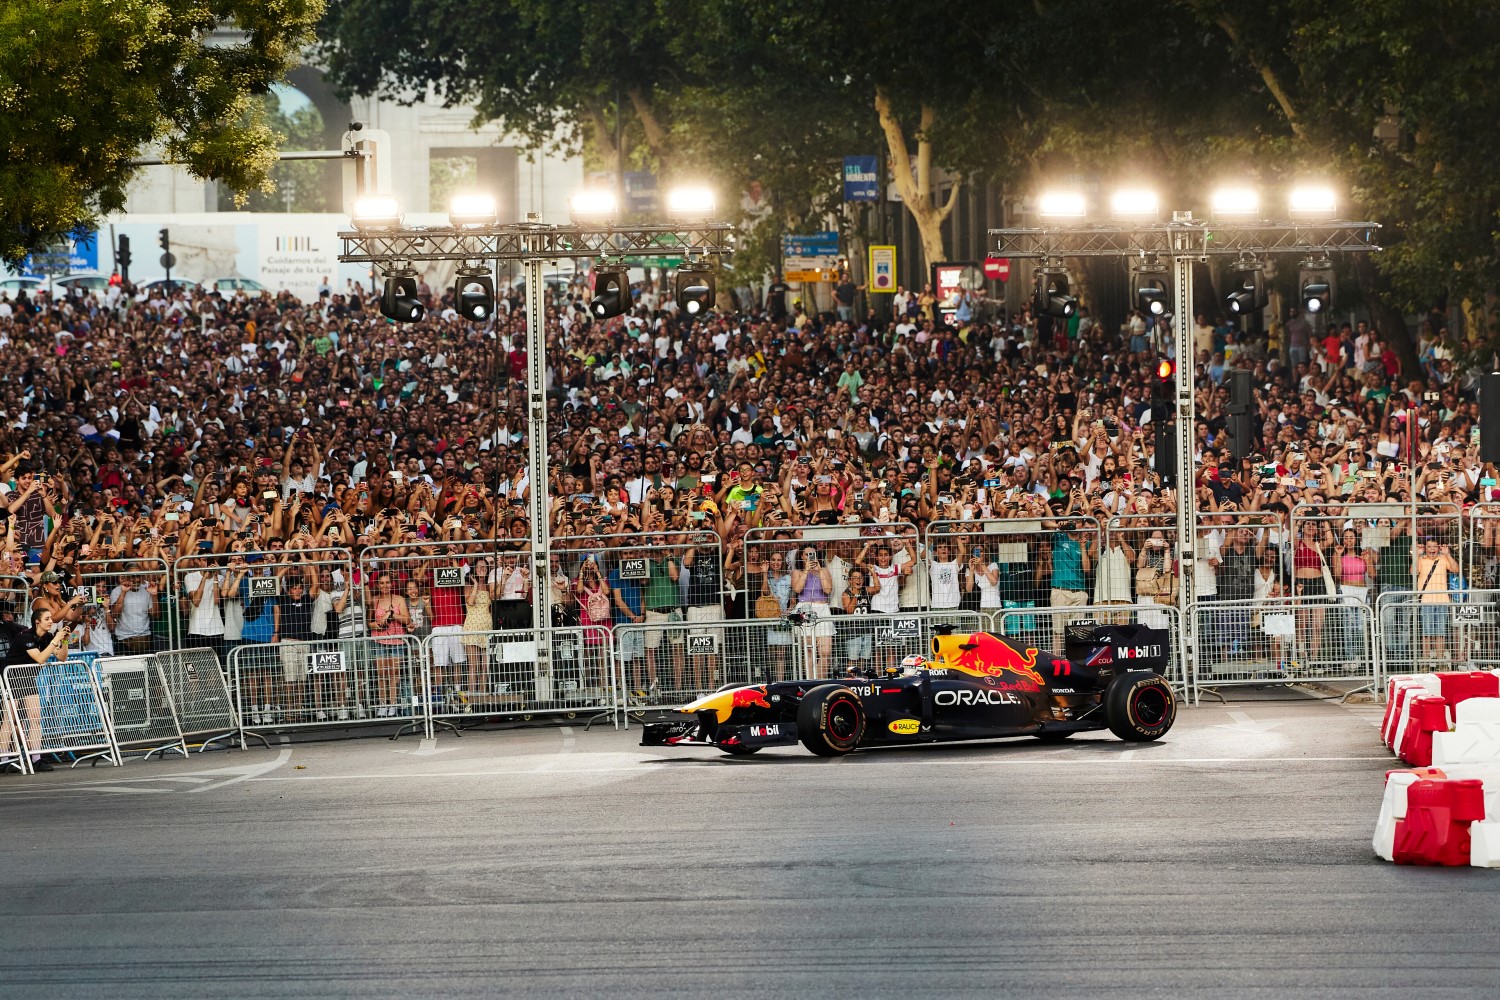 Sergio "Checo" Perez performs during Red Bull Showrun in Madrid, Spain on 15 July 2023. // Gianfranco Tripodo / Red Bull Content Pool